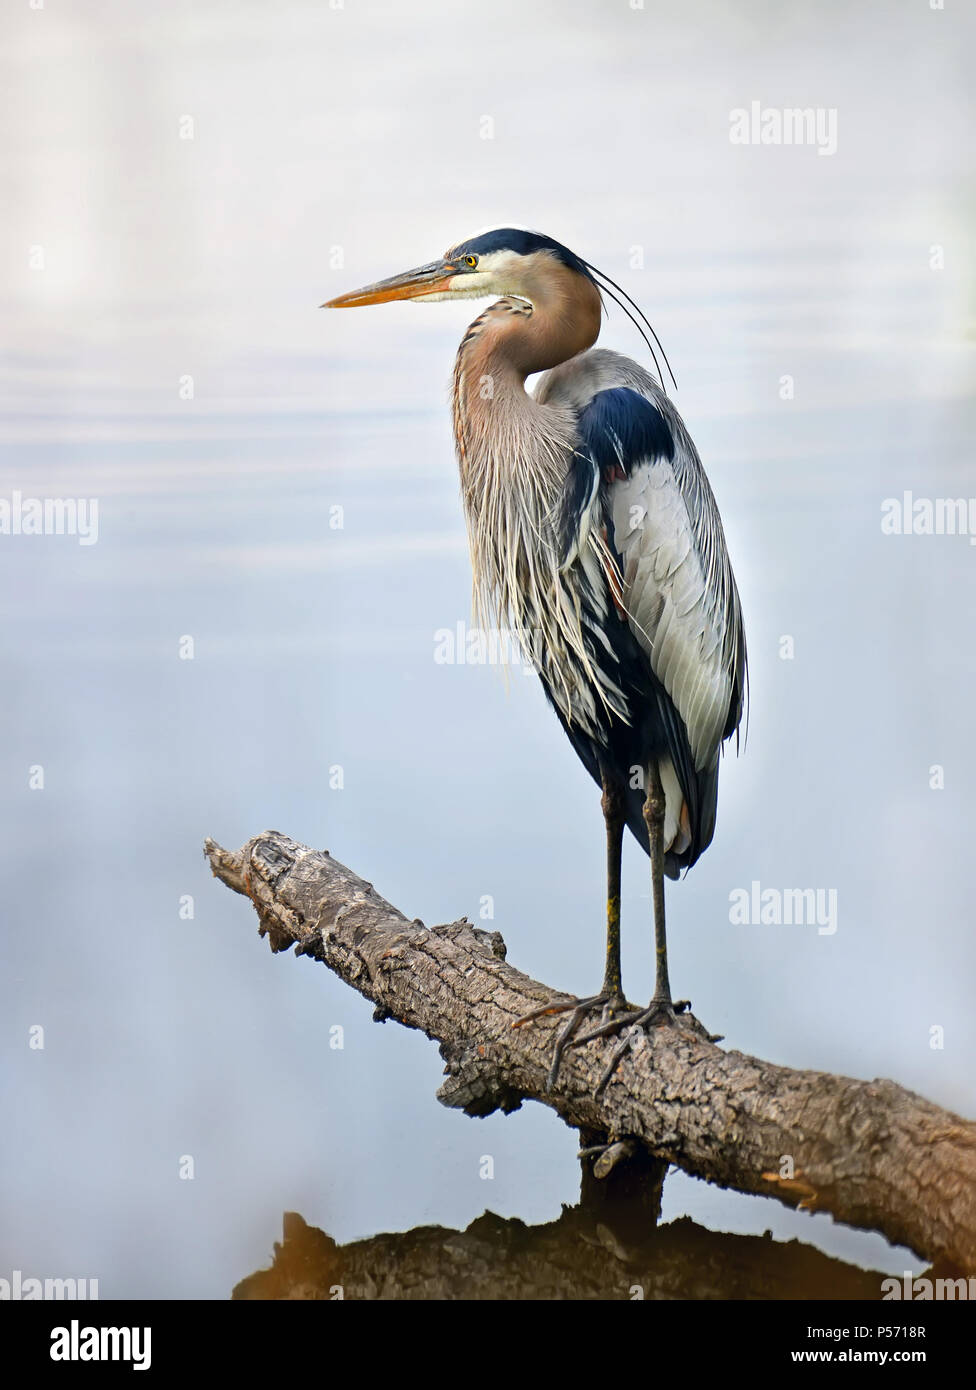 Closeup of a Great Blue Heron standing majestically on a log in the water gazing out over the Chesapeake bay in Maryland Stock Photo